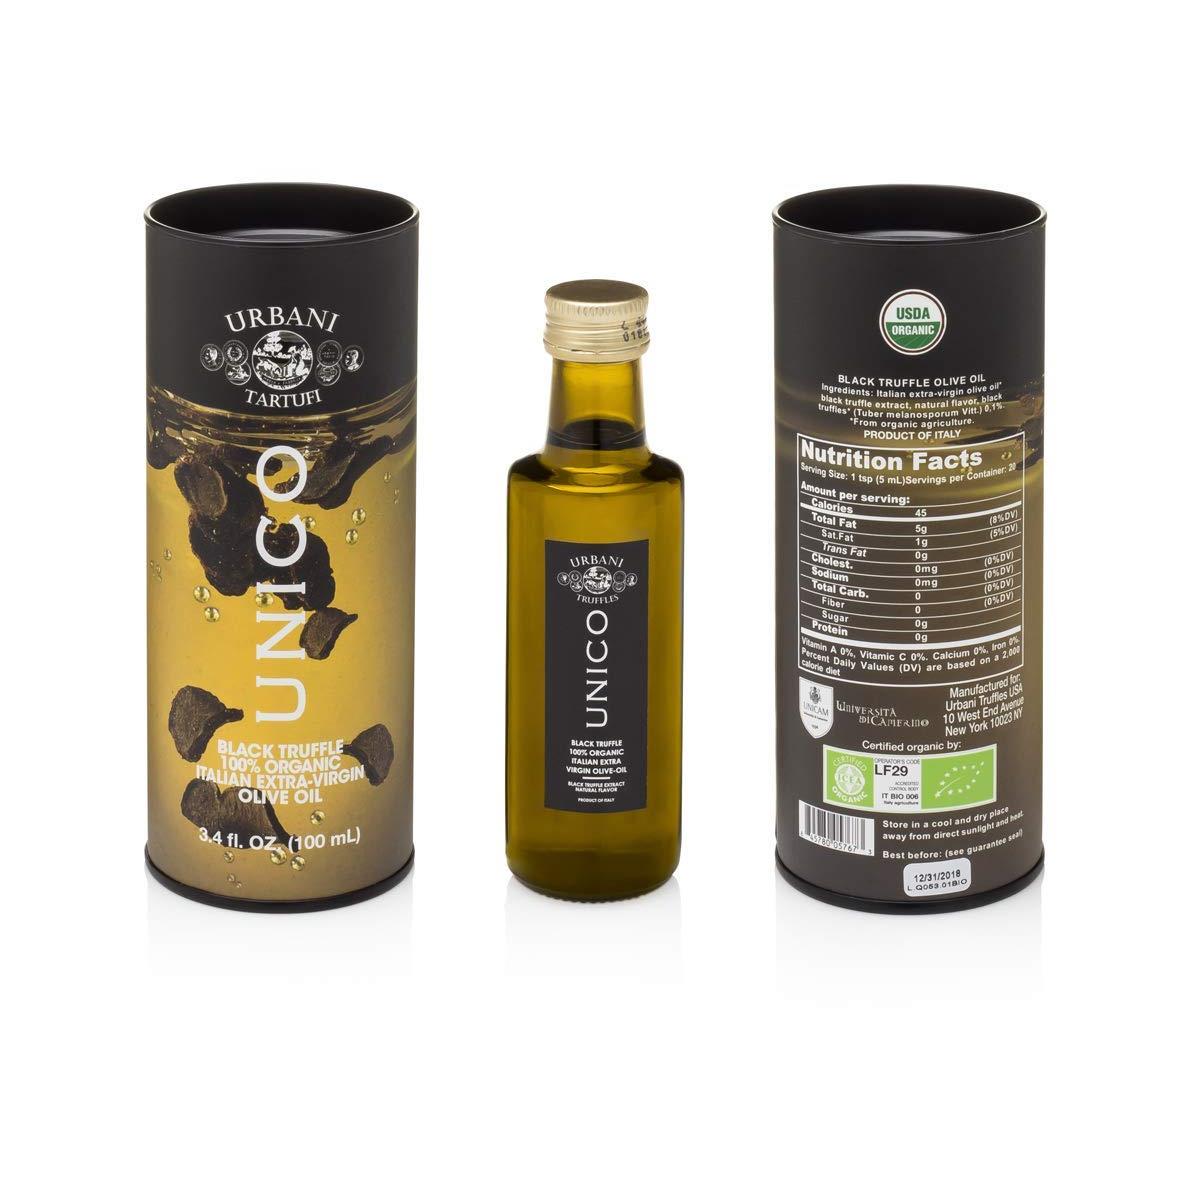 Italian Black Truffle Extra Virgin Olive Oil - by Urbani Truffles. Organic Truffle Oil 100% Made In Italy Without Chemicals And With Real Truffle Pieces Inside The Bottle. No Artificial Aroma. 3.4 Oz.